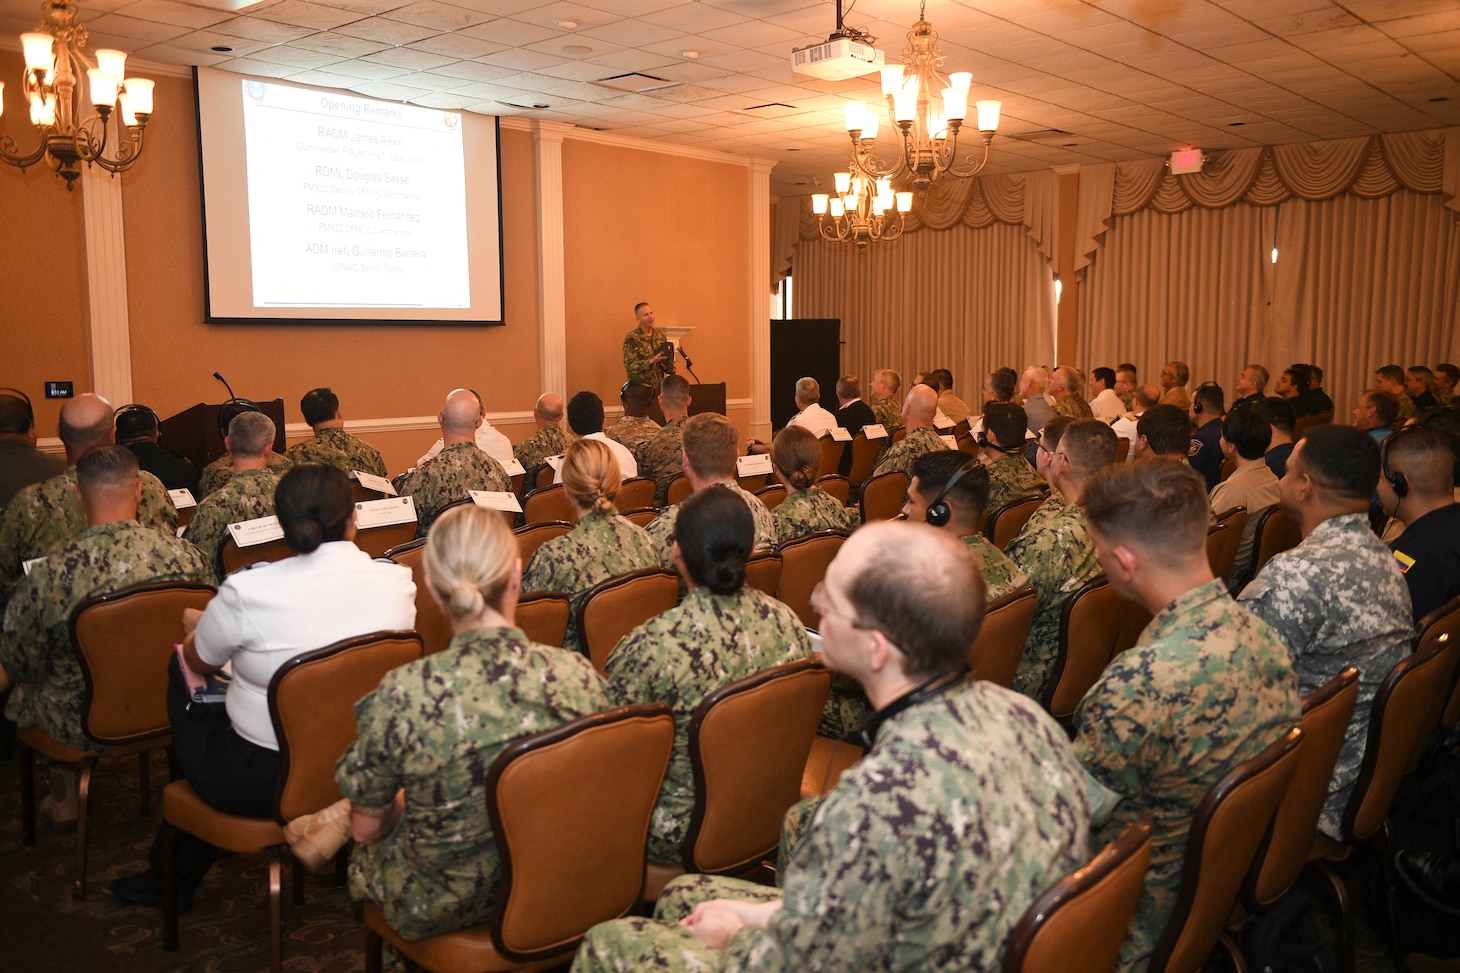 Rear Adm. Jim Aiken, Commander, U.S. Naval Forces Southern Command/U.S. 4th Fleet, provides opening remarks to participants during the start of PANAMAX 2022, at Naval Station Mayport, Fla., Aug. 2, 2022. Exercise PANAMAX 2022 is a U.S. Southern Command-sponsored exercise that provides important training opportunities for nations to work together and build upon the capability to plan and conduct complex multinational operations. The exercise scenario involves security and stability operations to ensure free flow of commerce through the Panama Canal